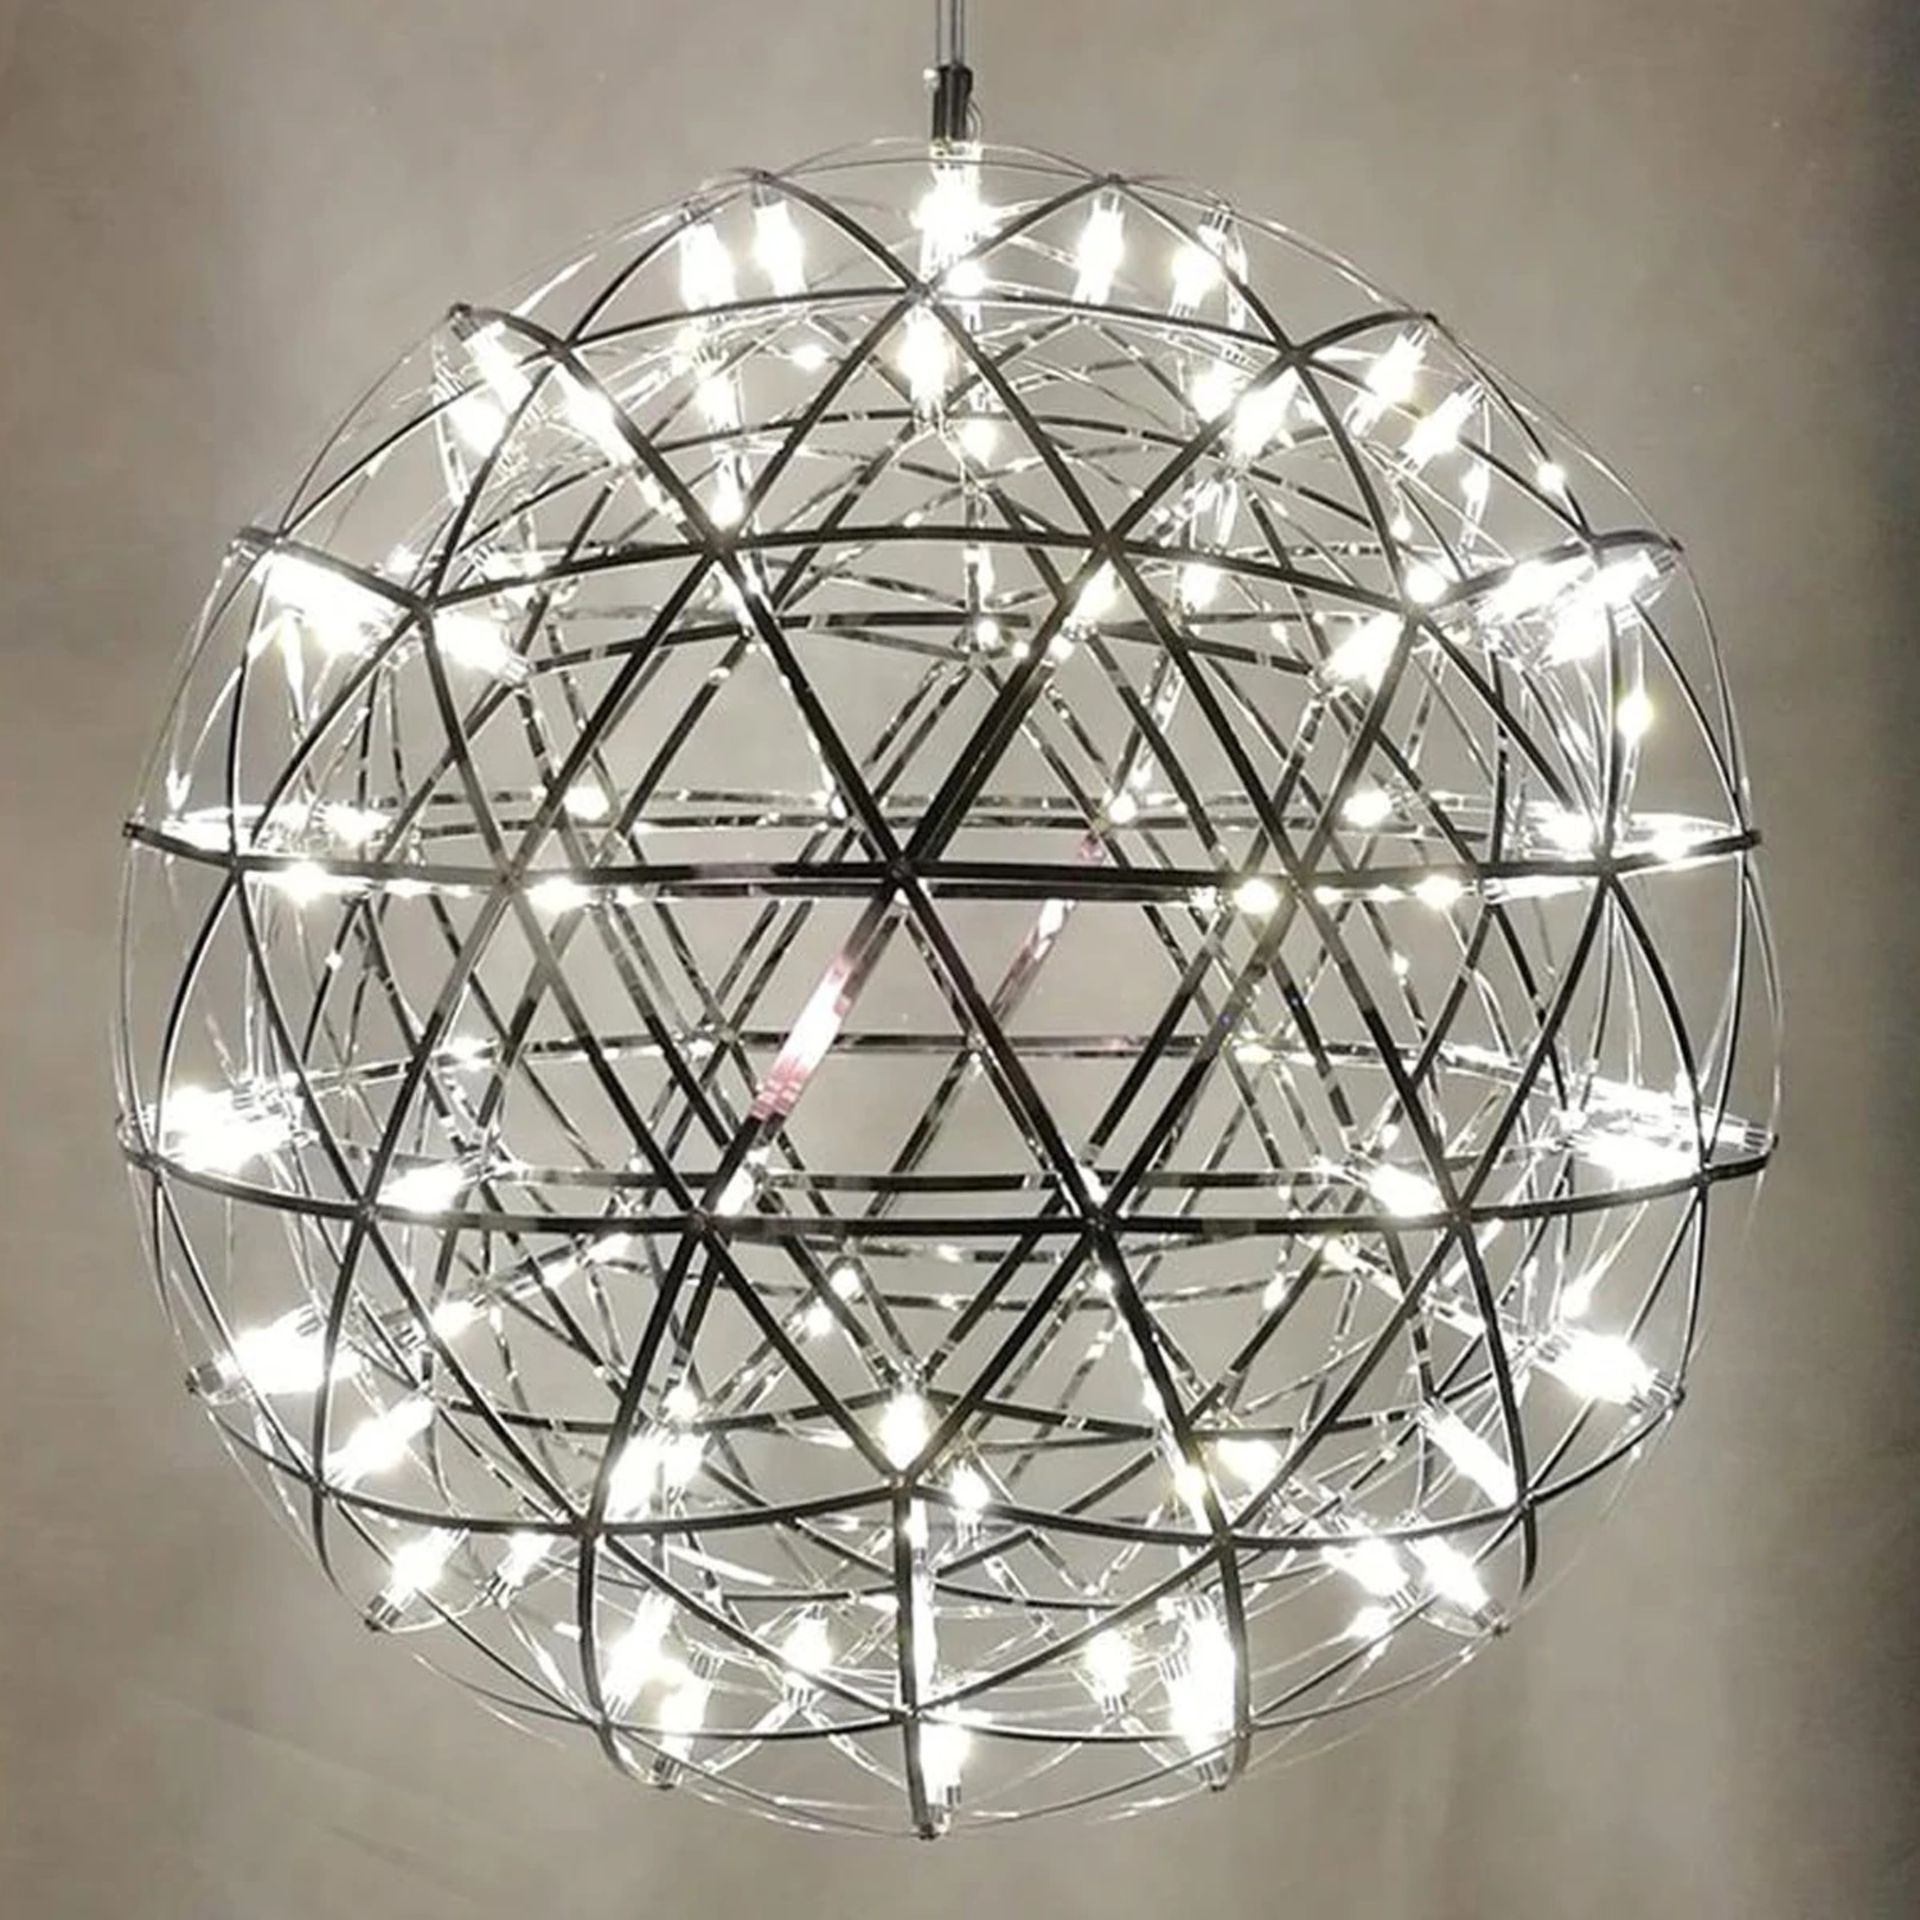 Starburst Hanging Pendant 90cm diameter x 92 lights with its chrome bodied spherical globe and - Image 2 of 3